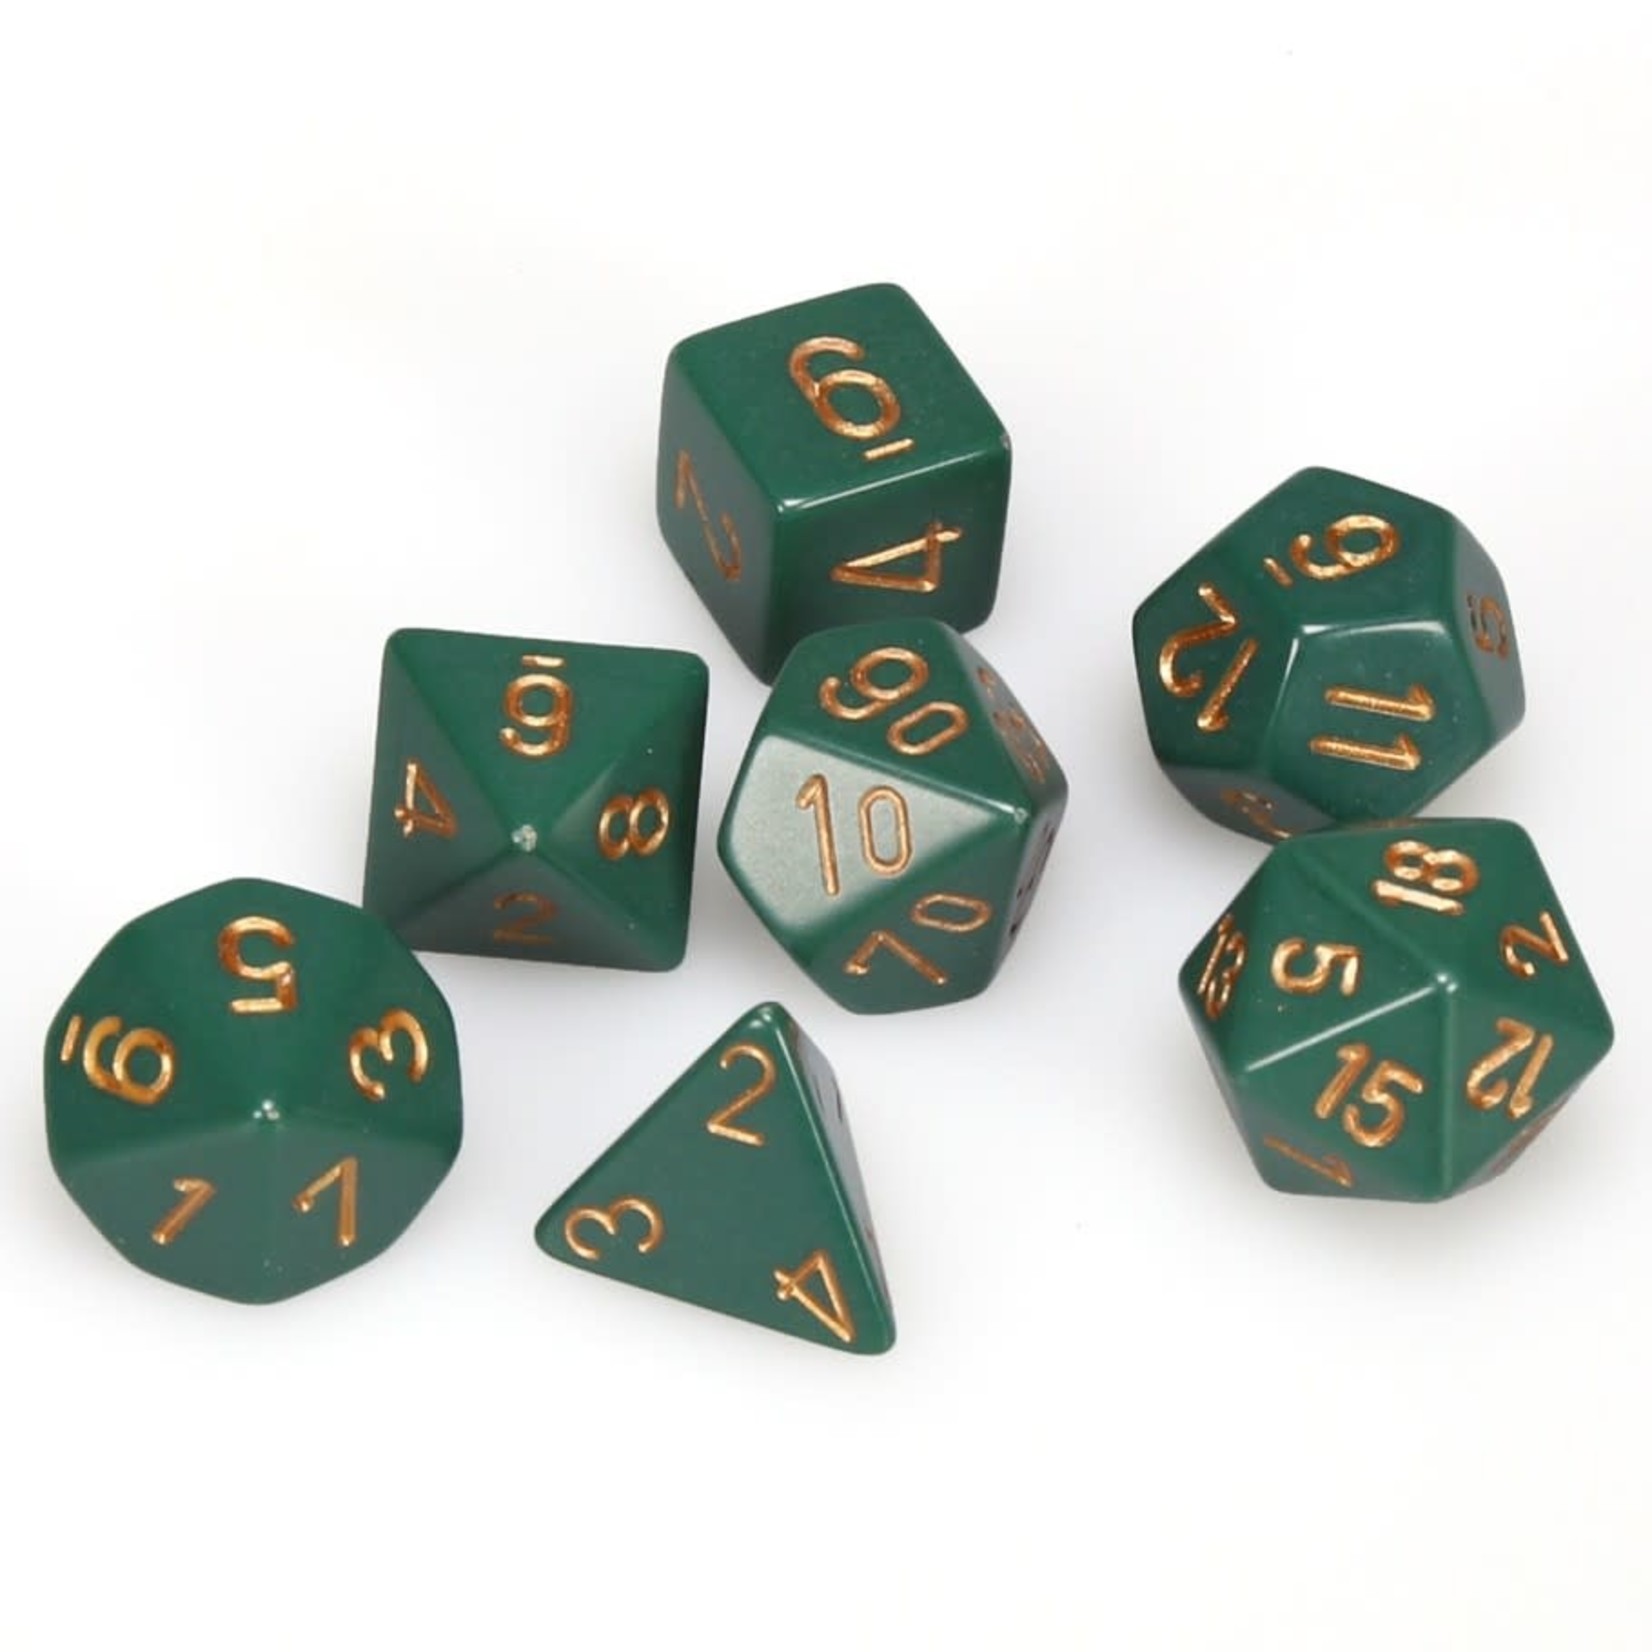 Chessex 7-Piece Dice Set: Opaque Dusty Green with Copper Numbers